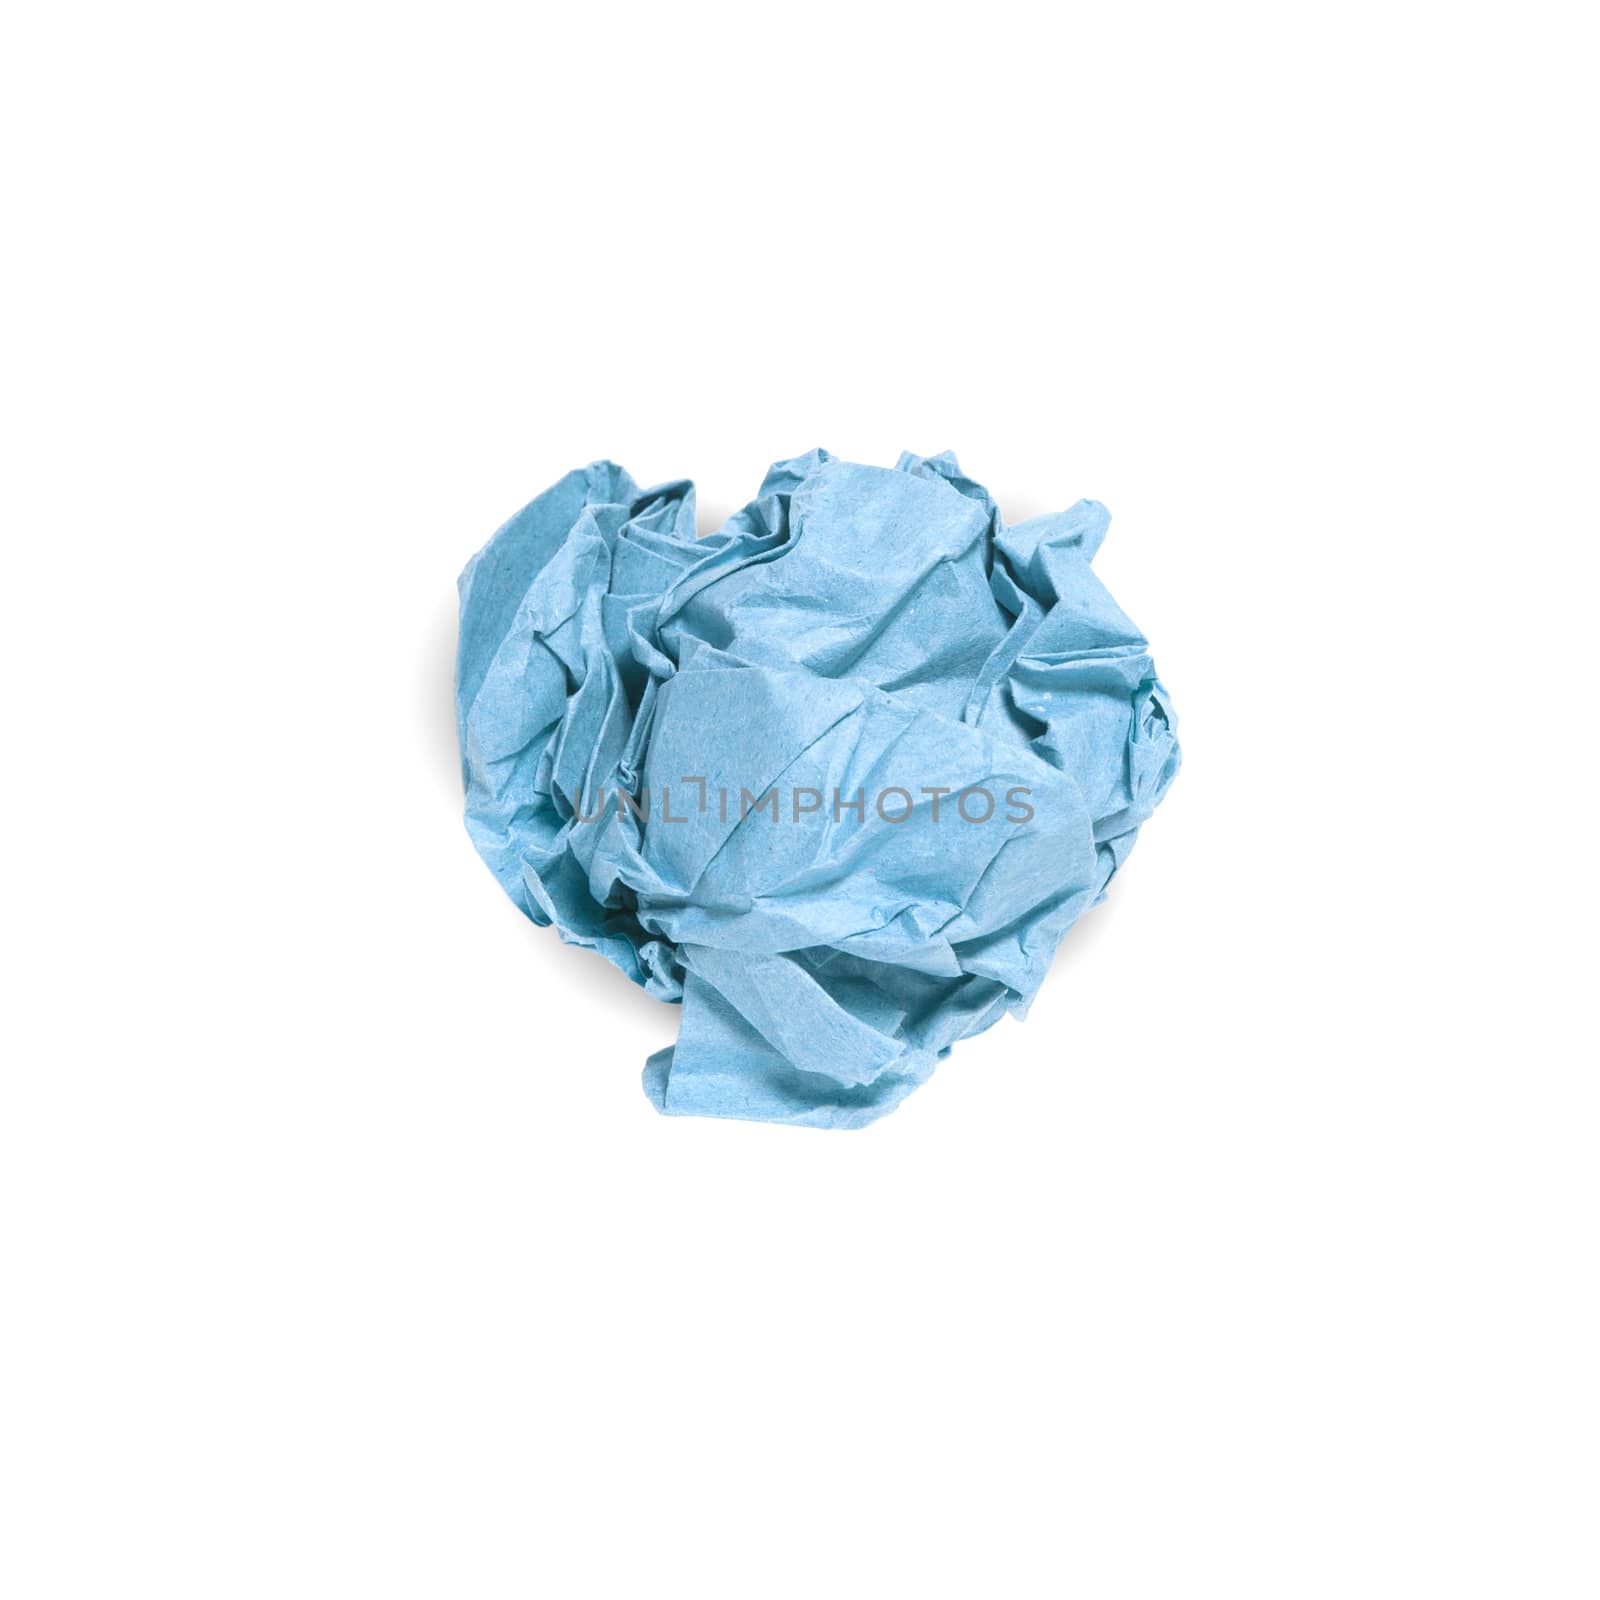 Crumpled blue paper ball isolated over white background by SlayCer